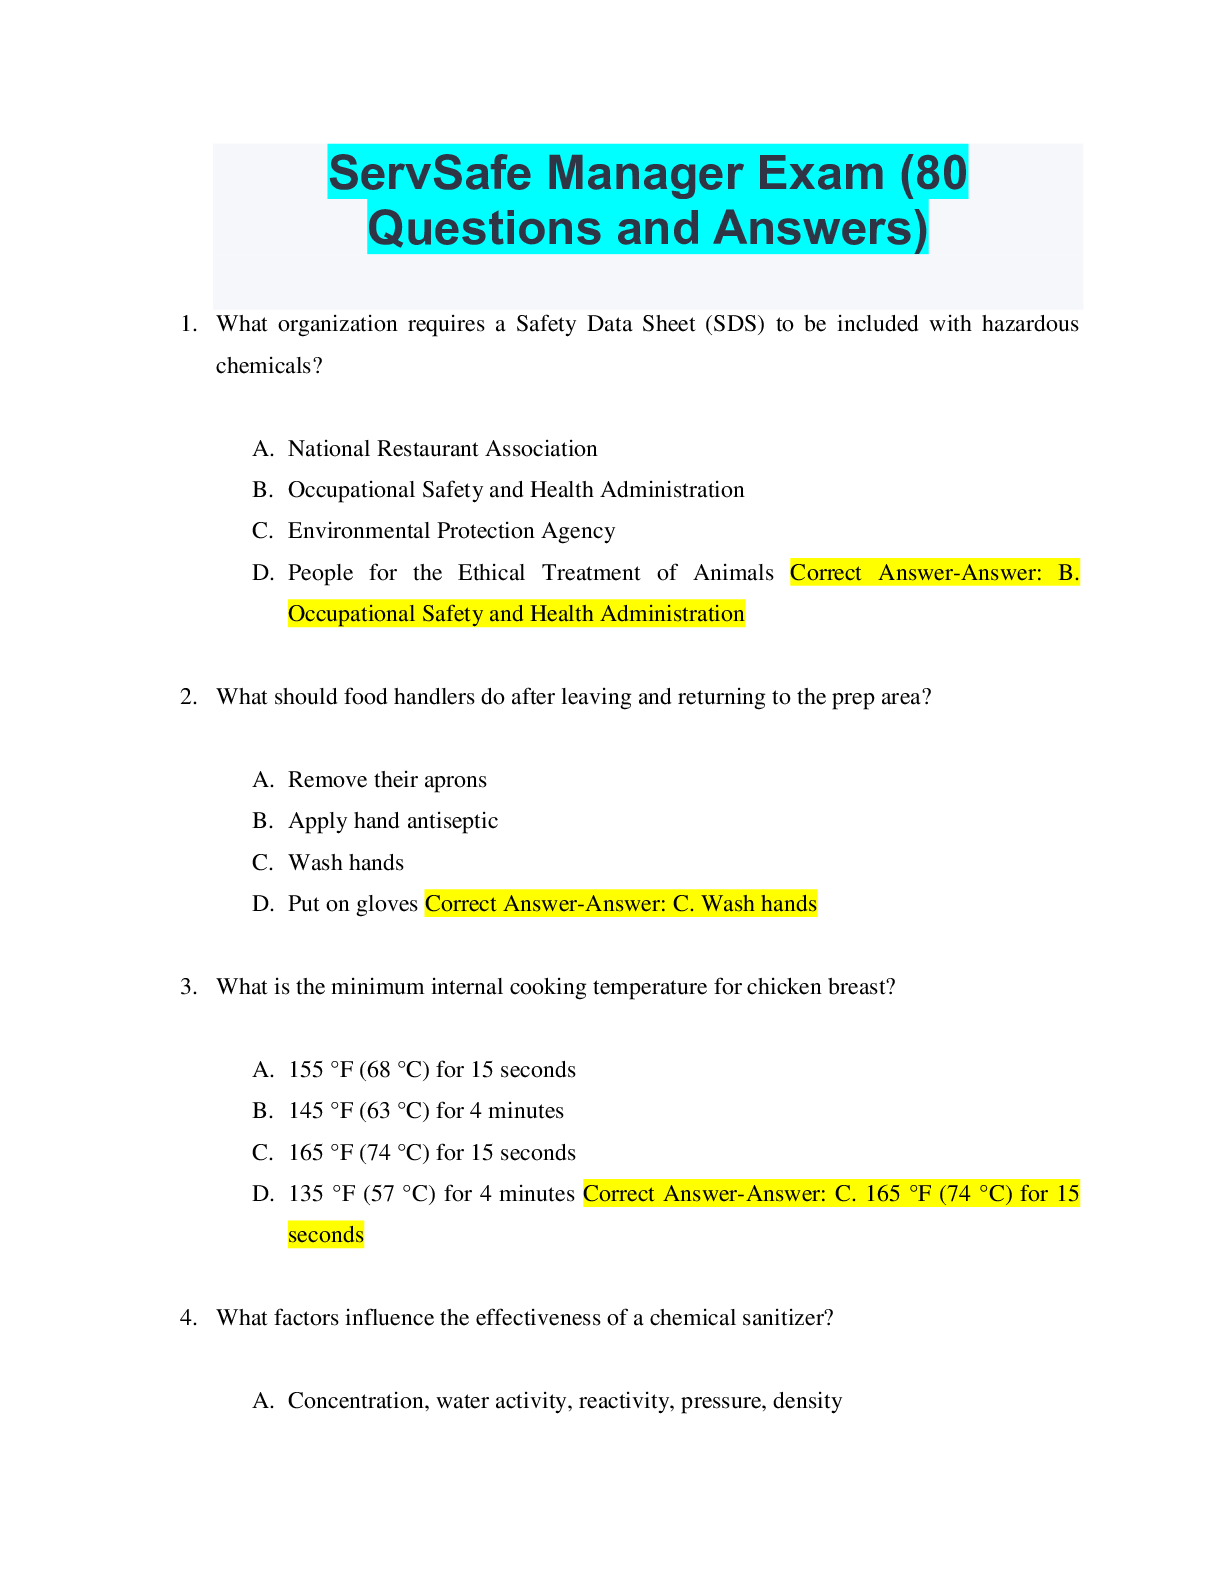 NUTRITION SUPPORT EXAM 1 (WITH 100+ QUESTIONS AND ANSWERS)